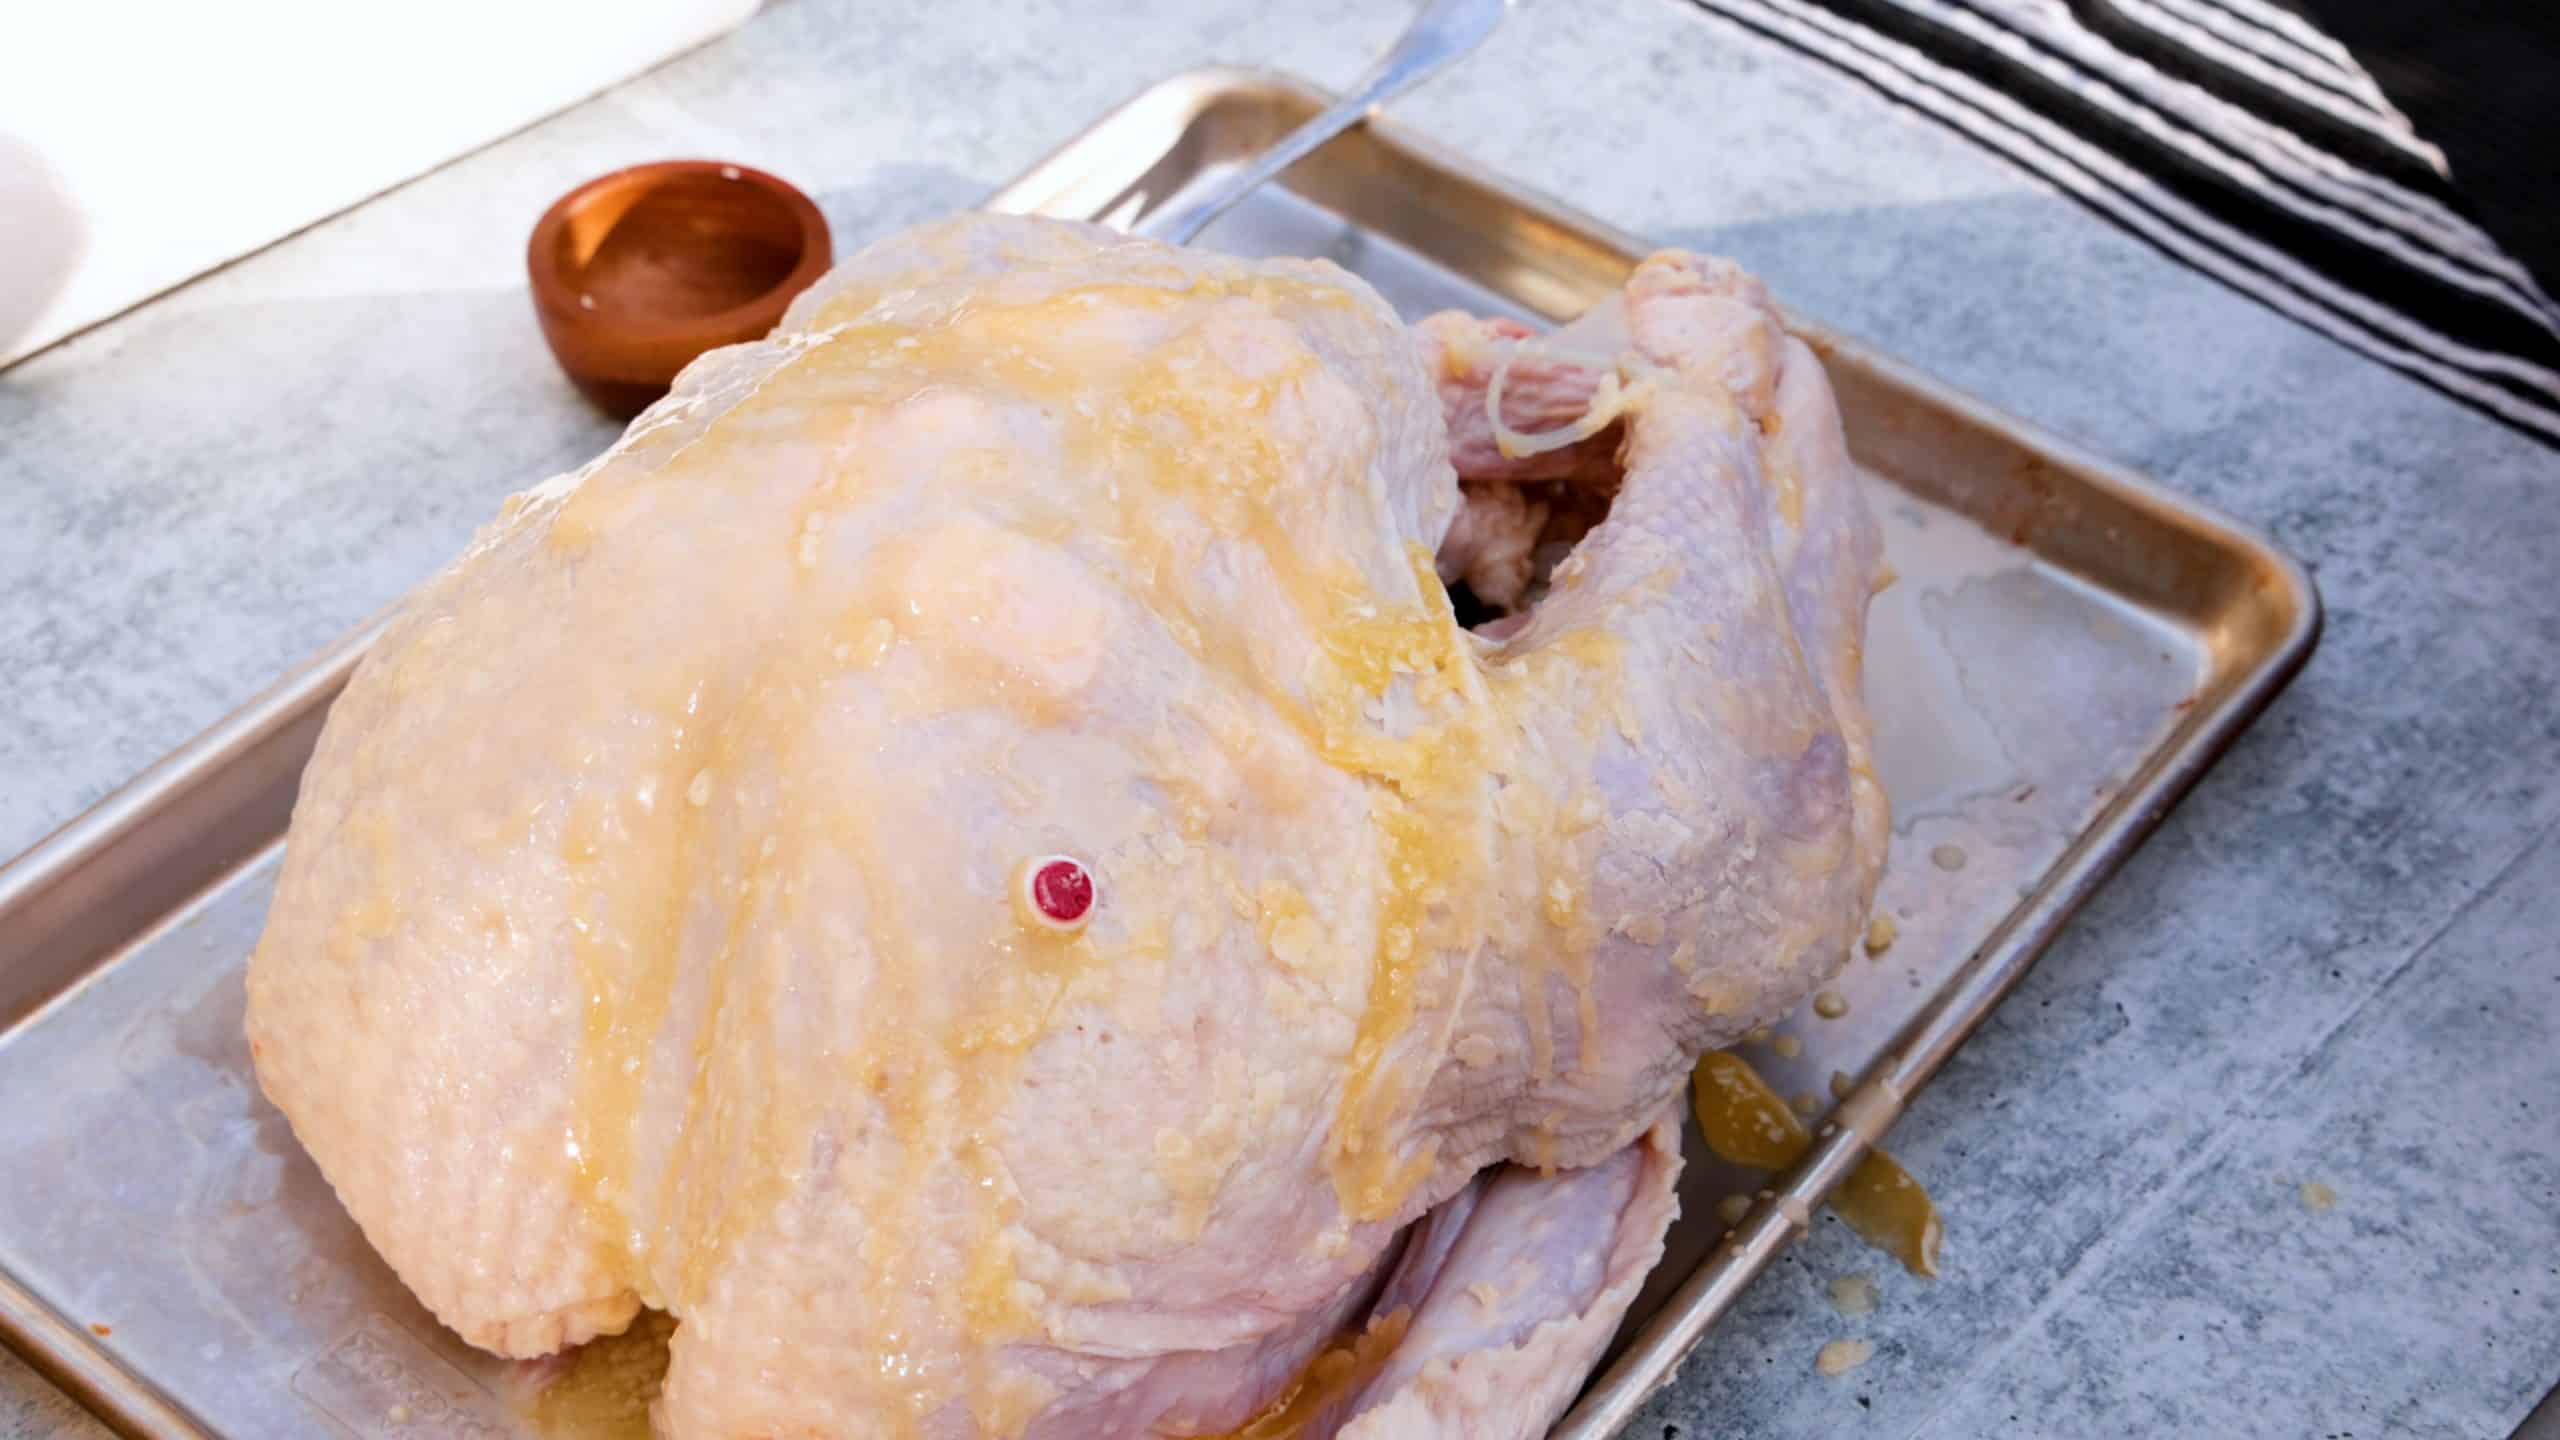 Uncooked raw turkey on baking sheet drizzled with melted butter.